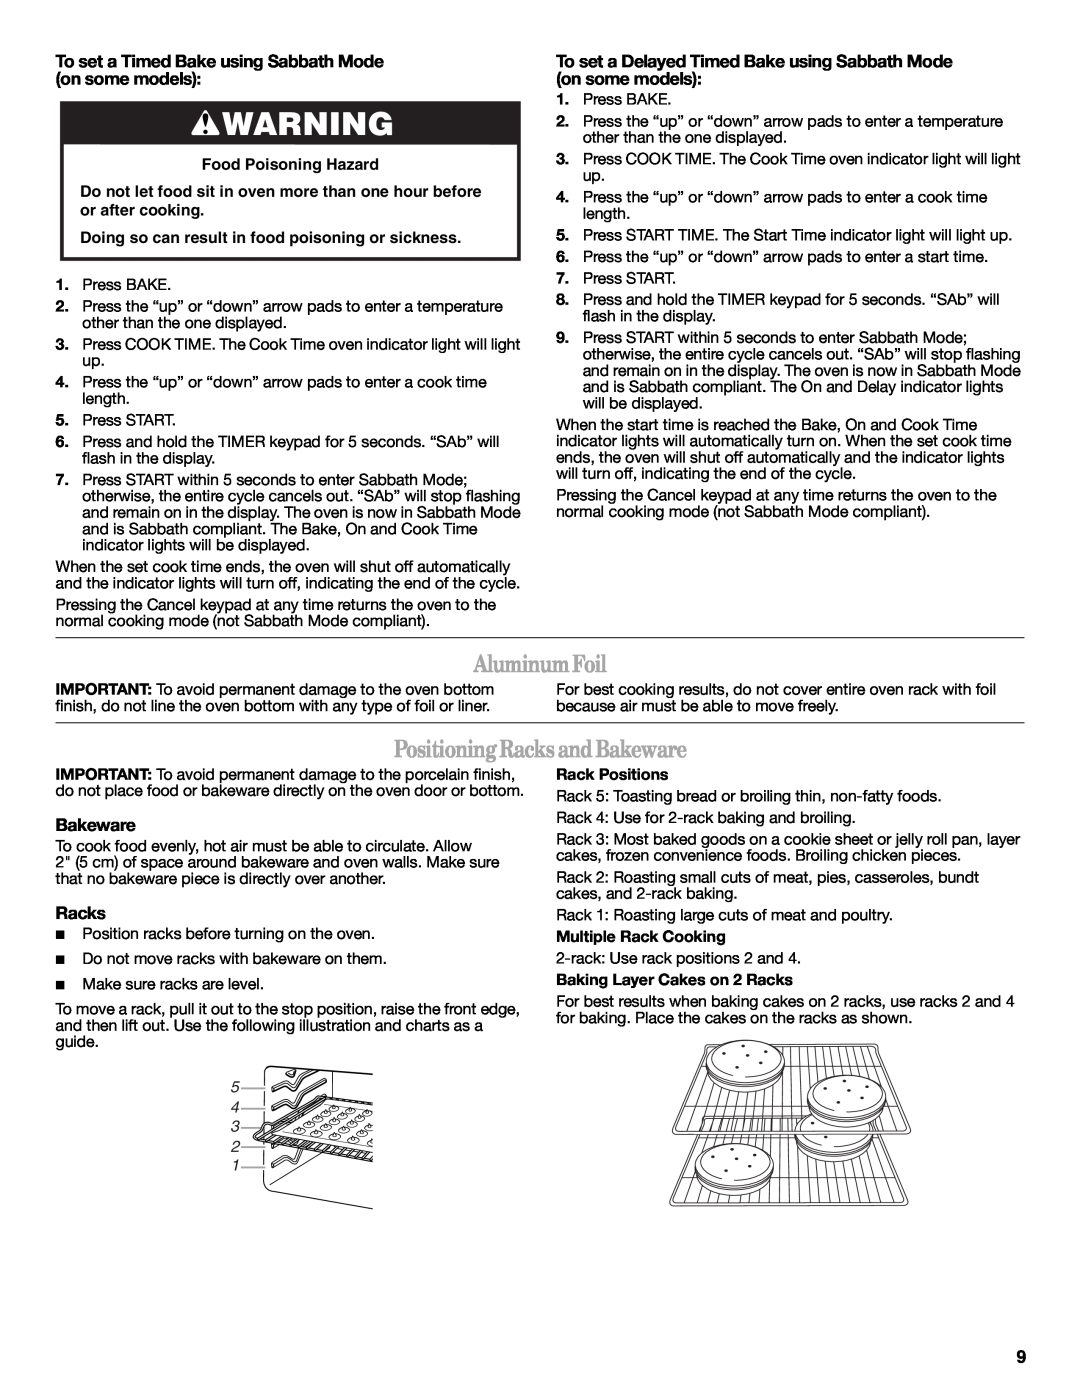 Whirlpool W10394385A AluminumFoil, PositioningRacks andBakeware, To set a Timed Bake using Sabbath Mode on some models 